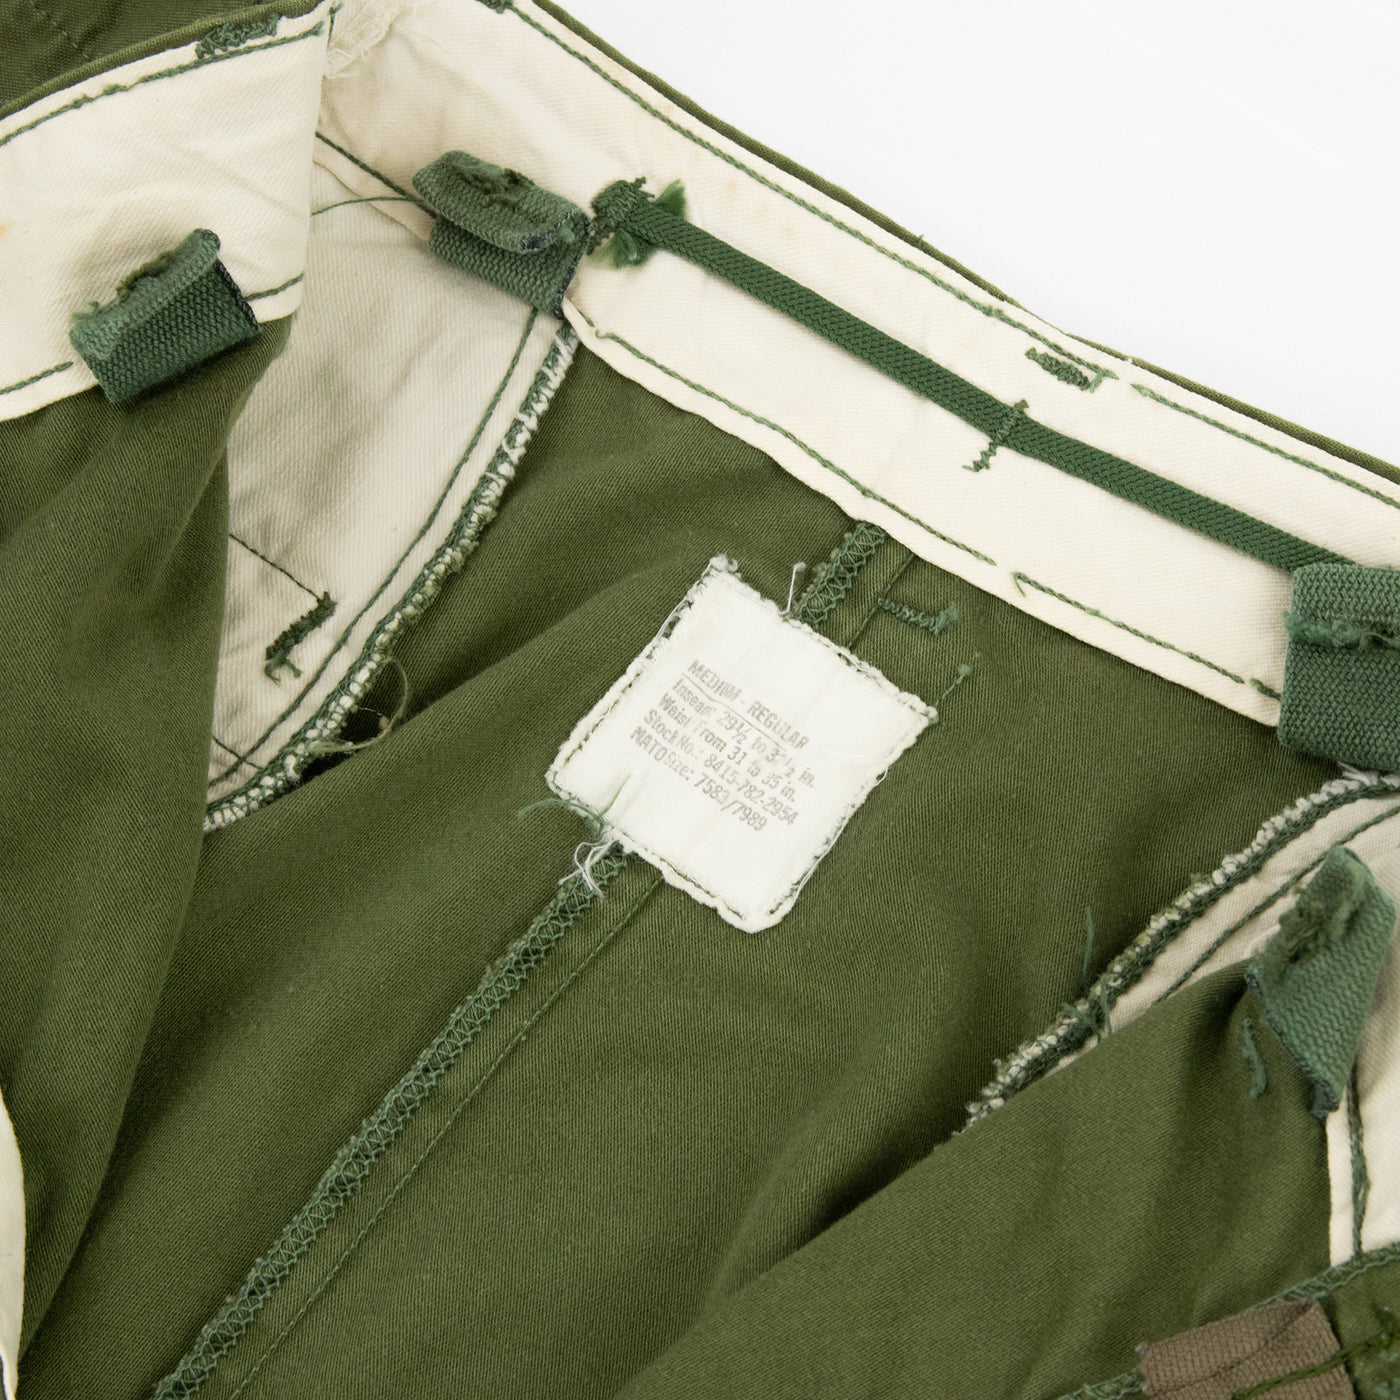 Vintage 1970s US Army M-1965 Cotton Sateen Military Field Trousers OG-107 - M Tag